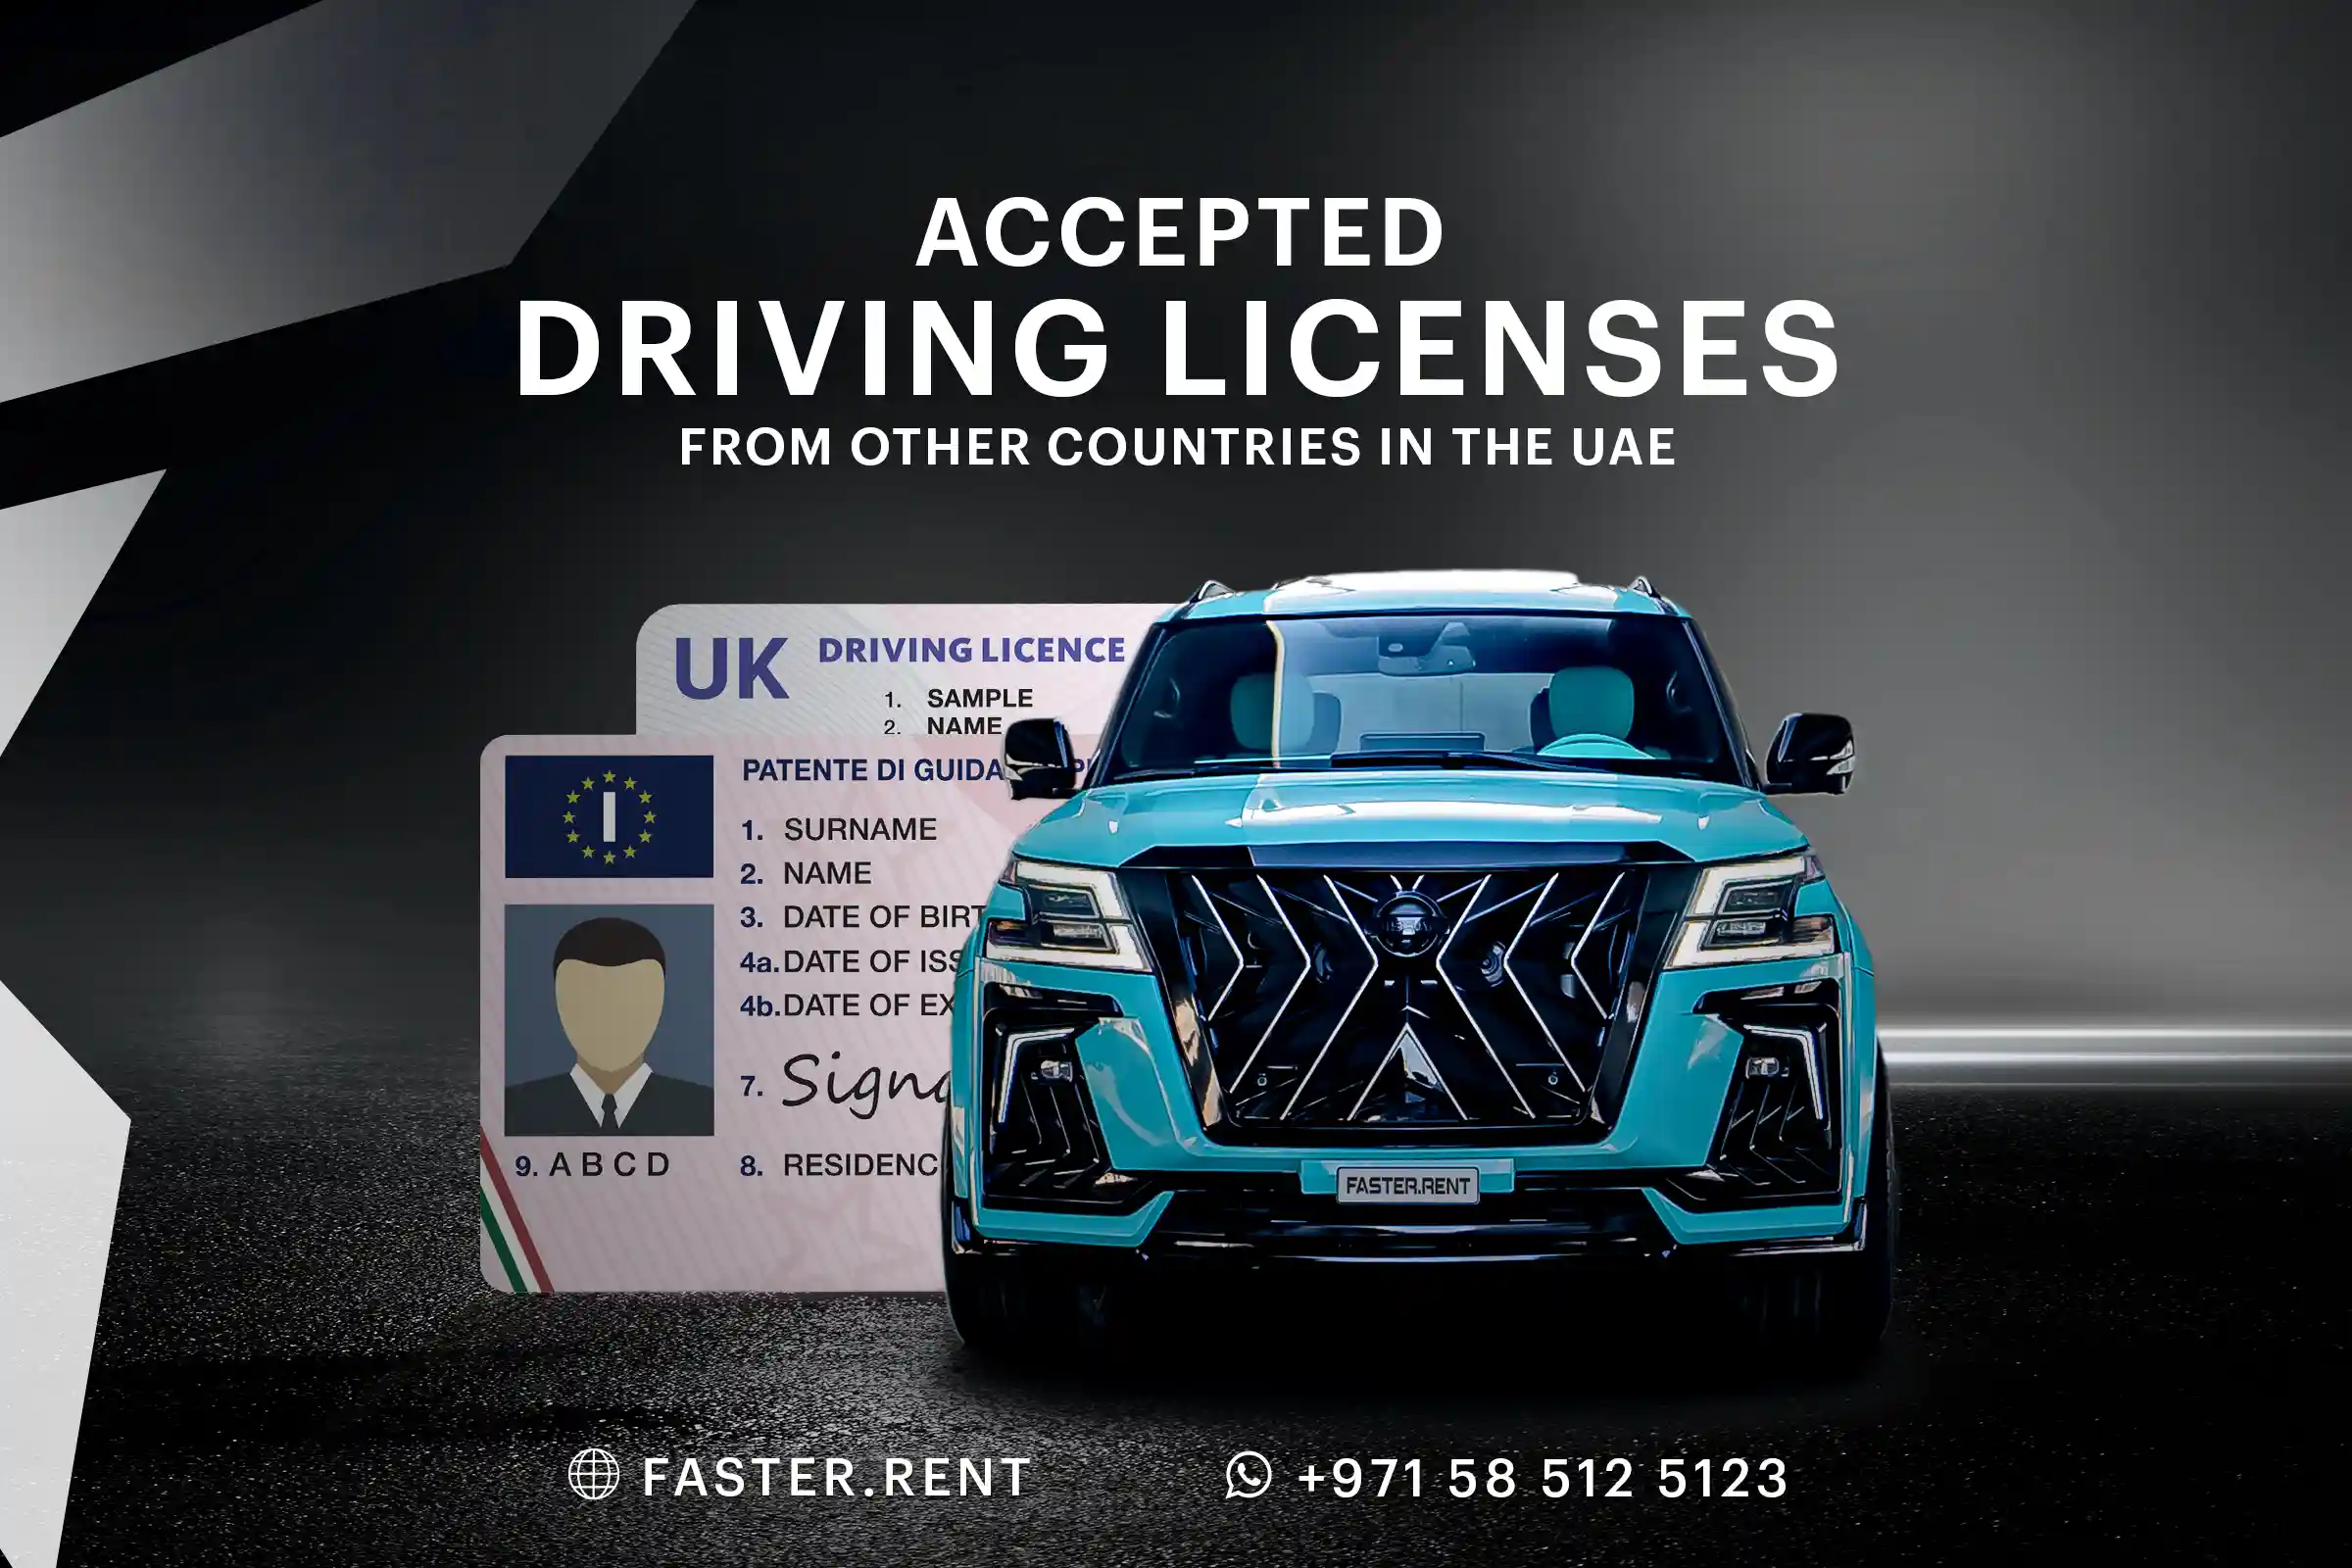 Accepted Driving Licenses from Other Countries in the UAE